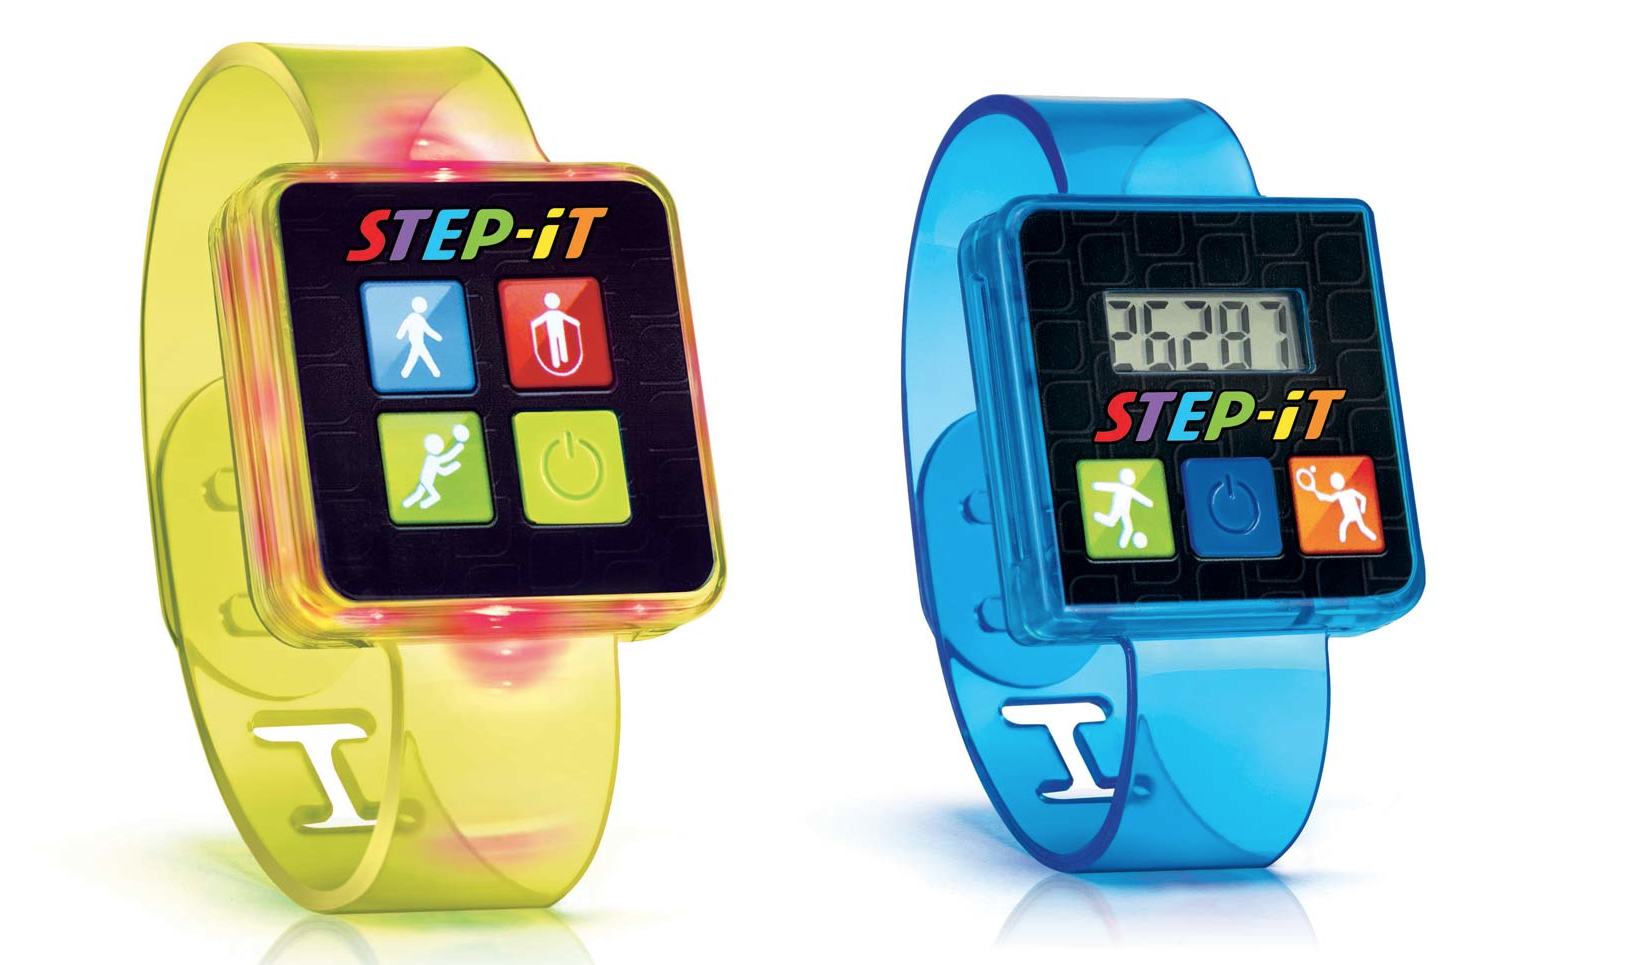 McDonald’s Officially Recalls 29 Million Happy Meal Fitness Trackers Over Concerns About Rashes, Burns